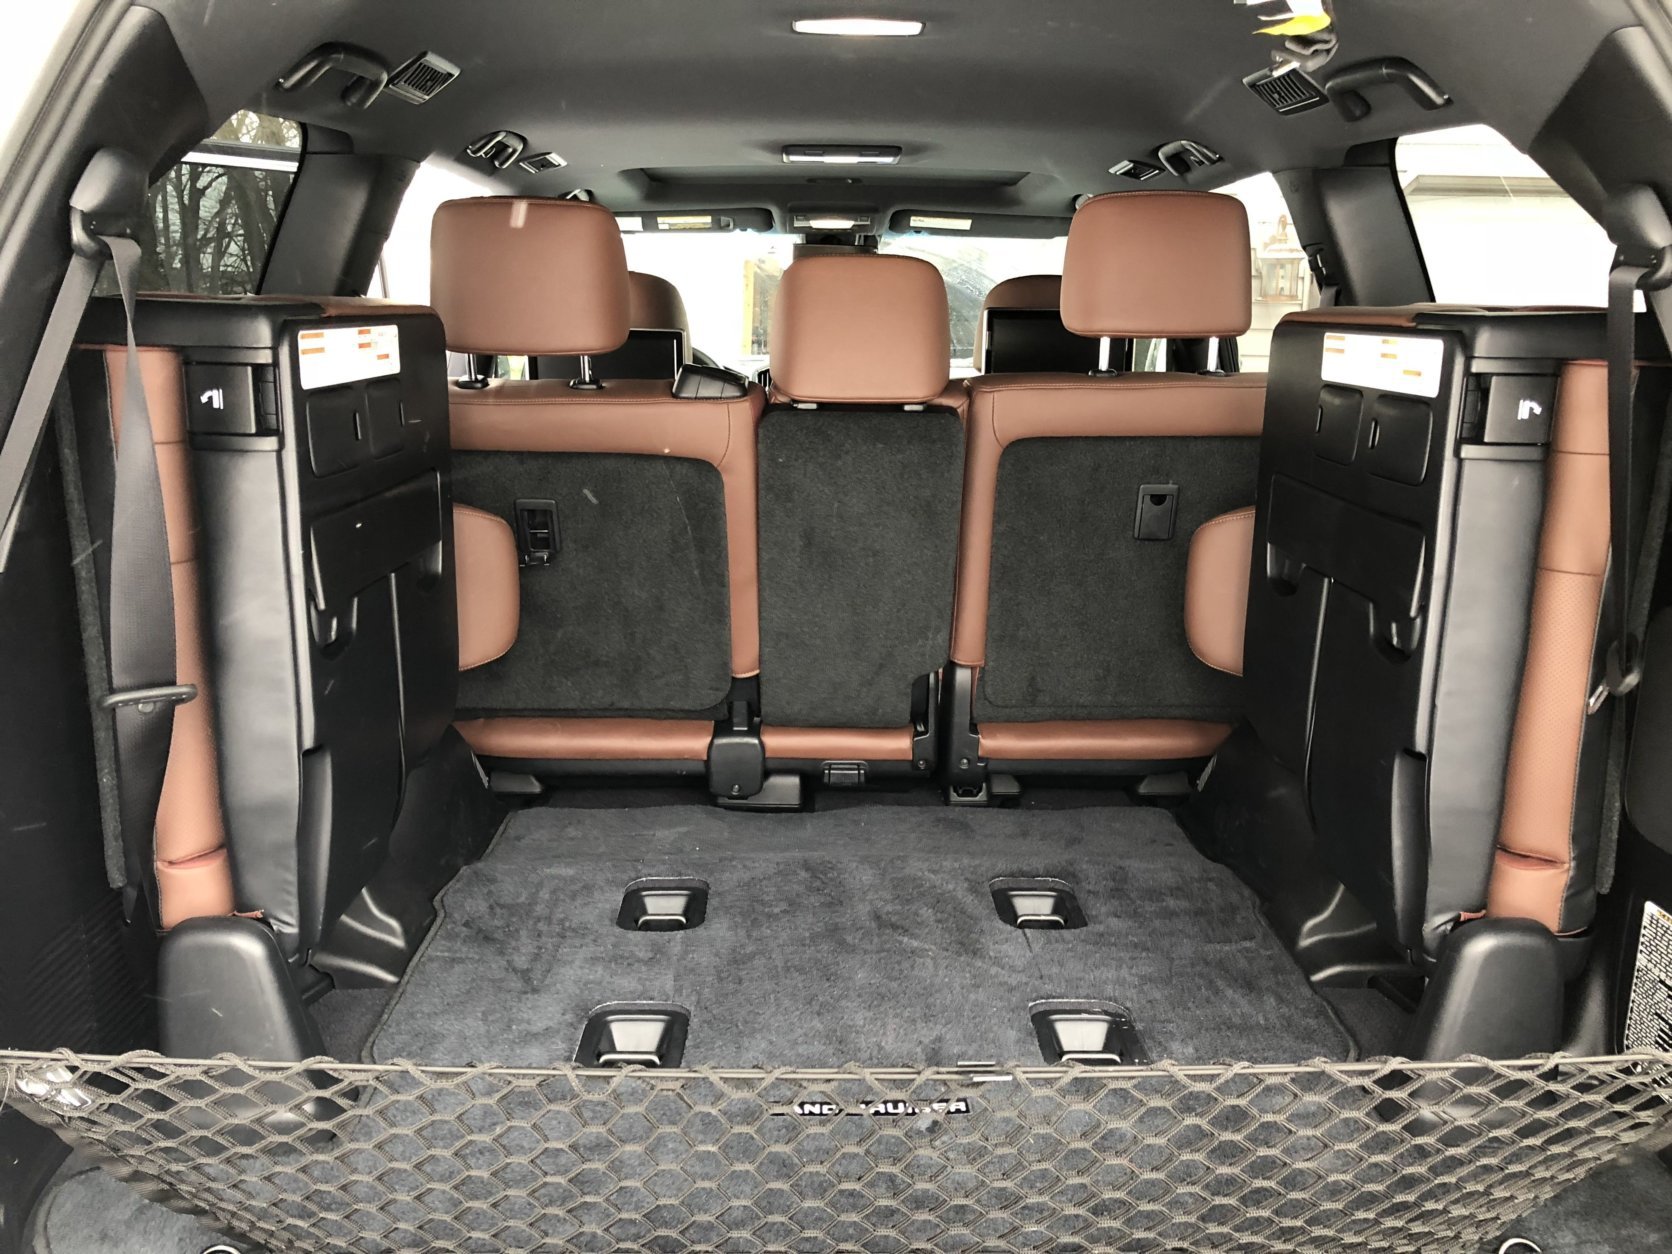 The Land Cruiser has compromised rear cargo area as the rear seats fold up and fold against the rear windows instead of fold into the floor. Wider items can be hard to load which can be a drawback. (WTOP/Mike Parris)